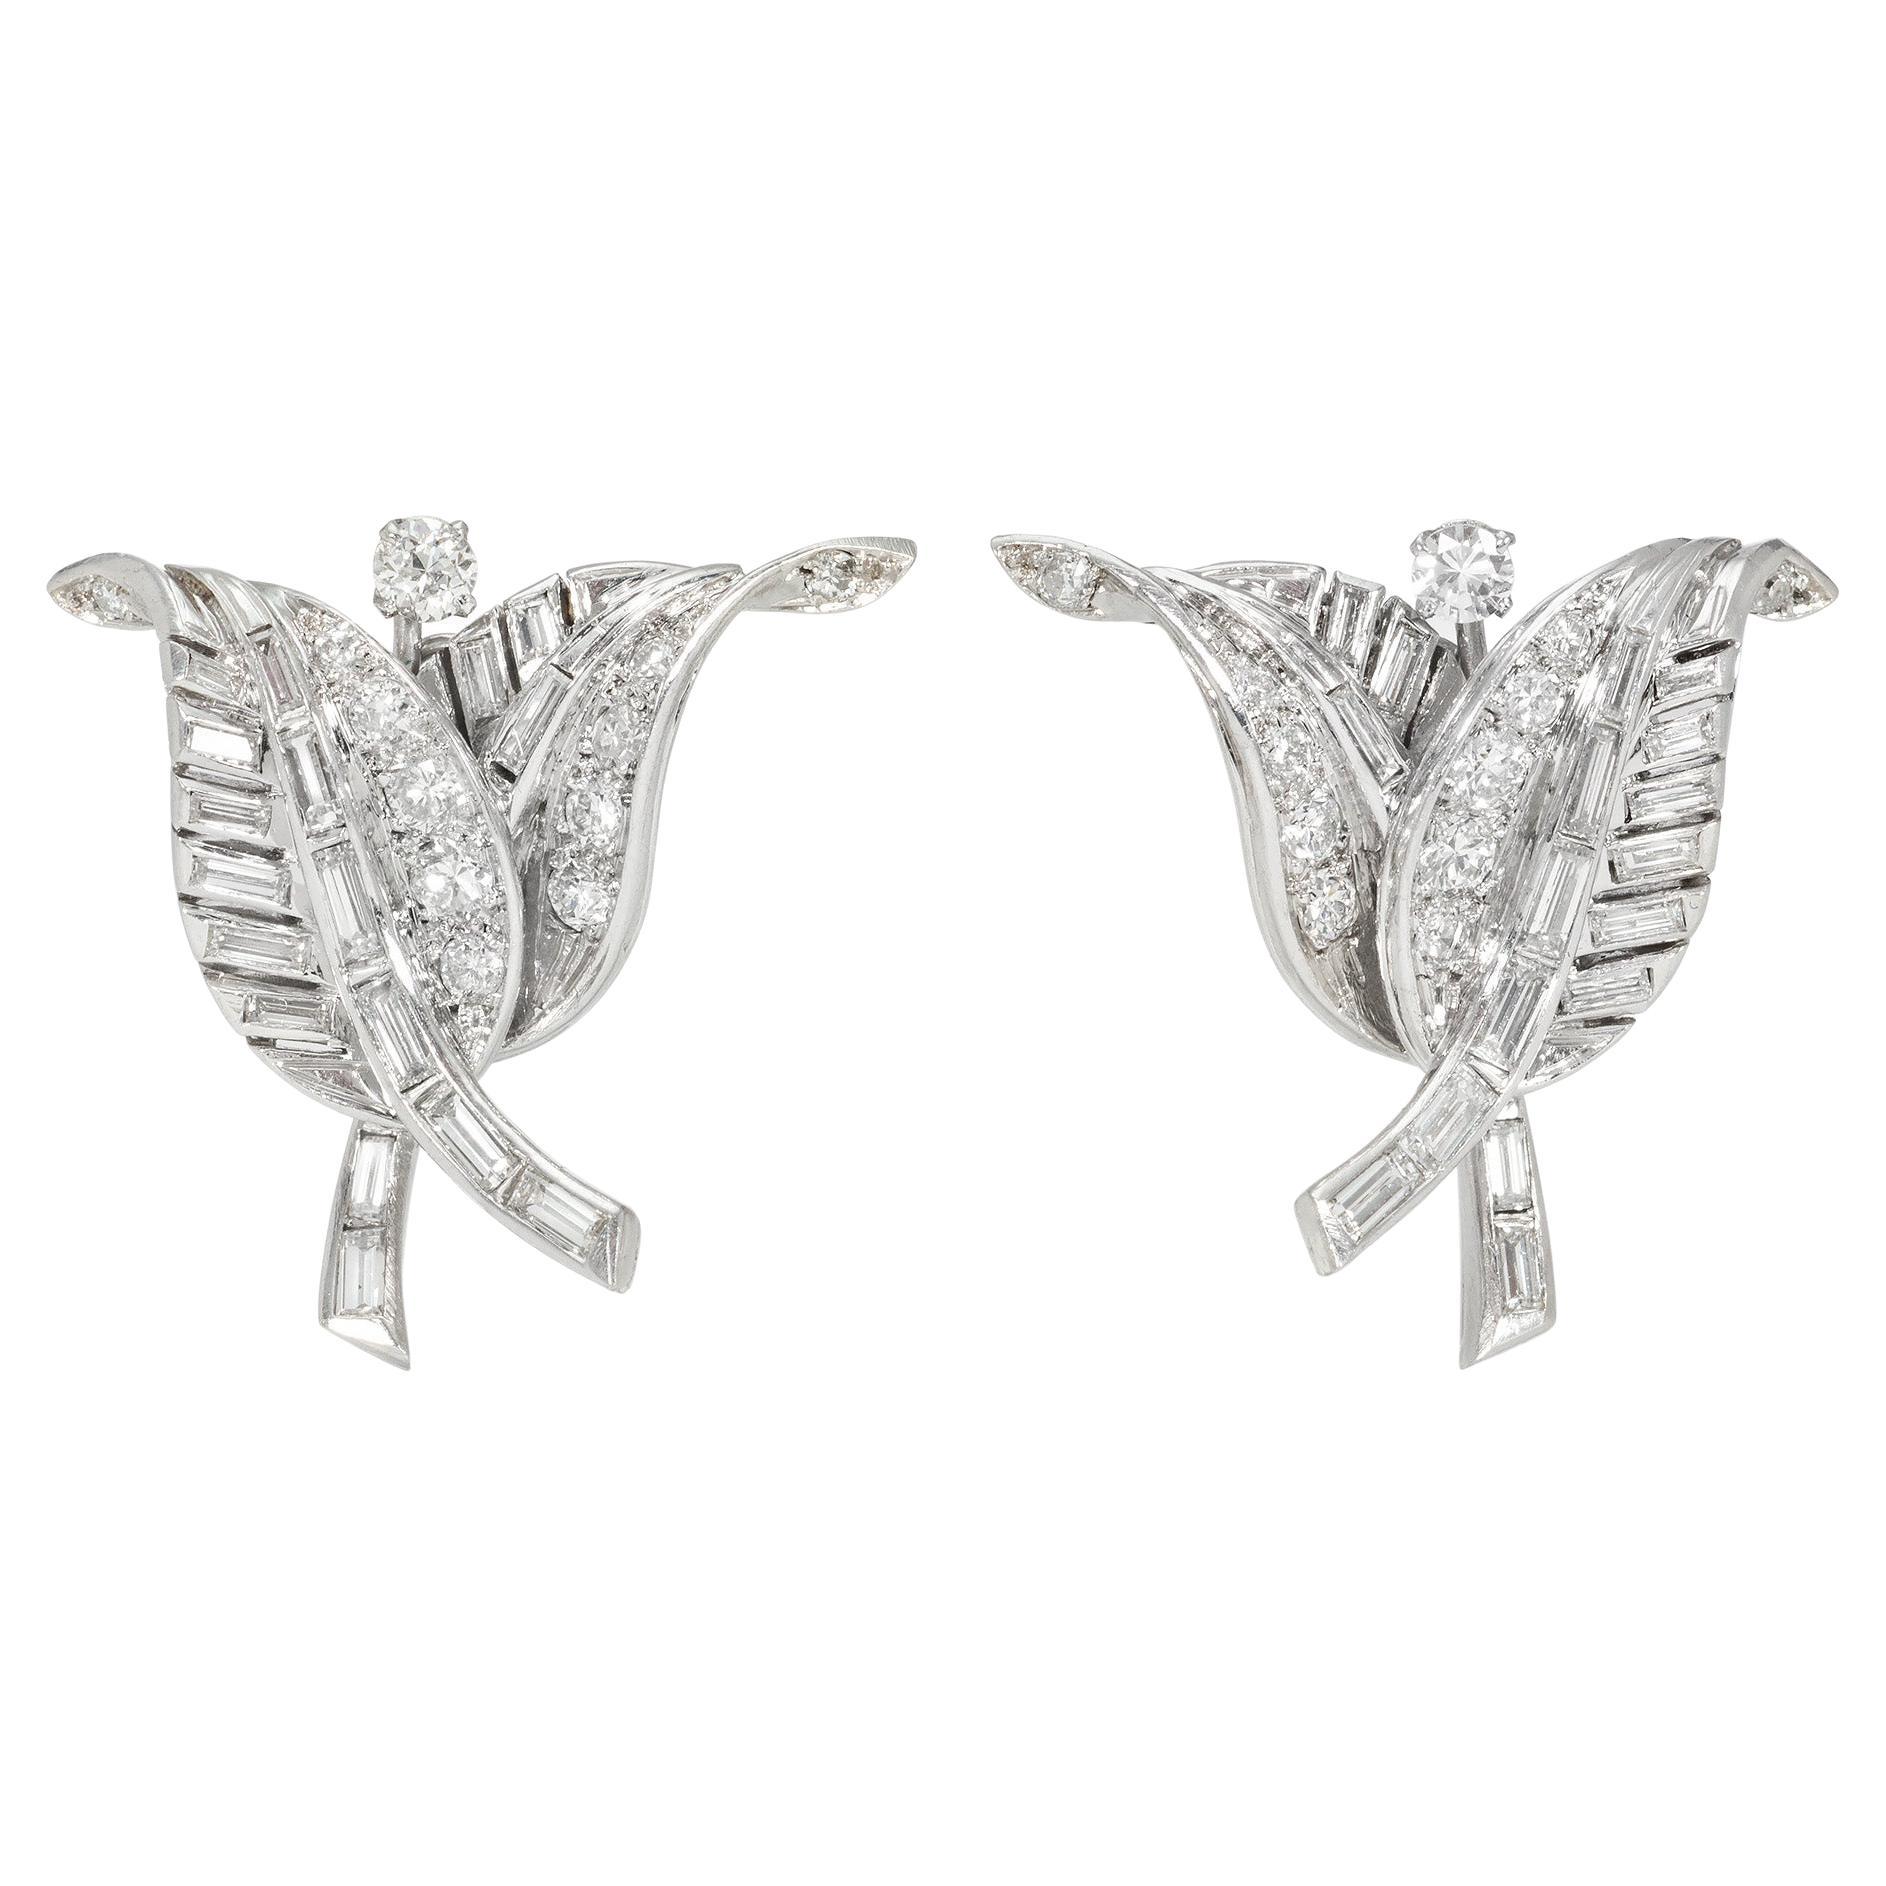 French Mid-Century Diamond and Platinum Clip Earrings of Overlapping Leaf Design For Sale